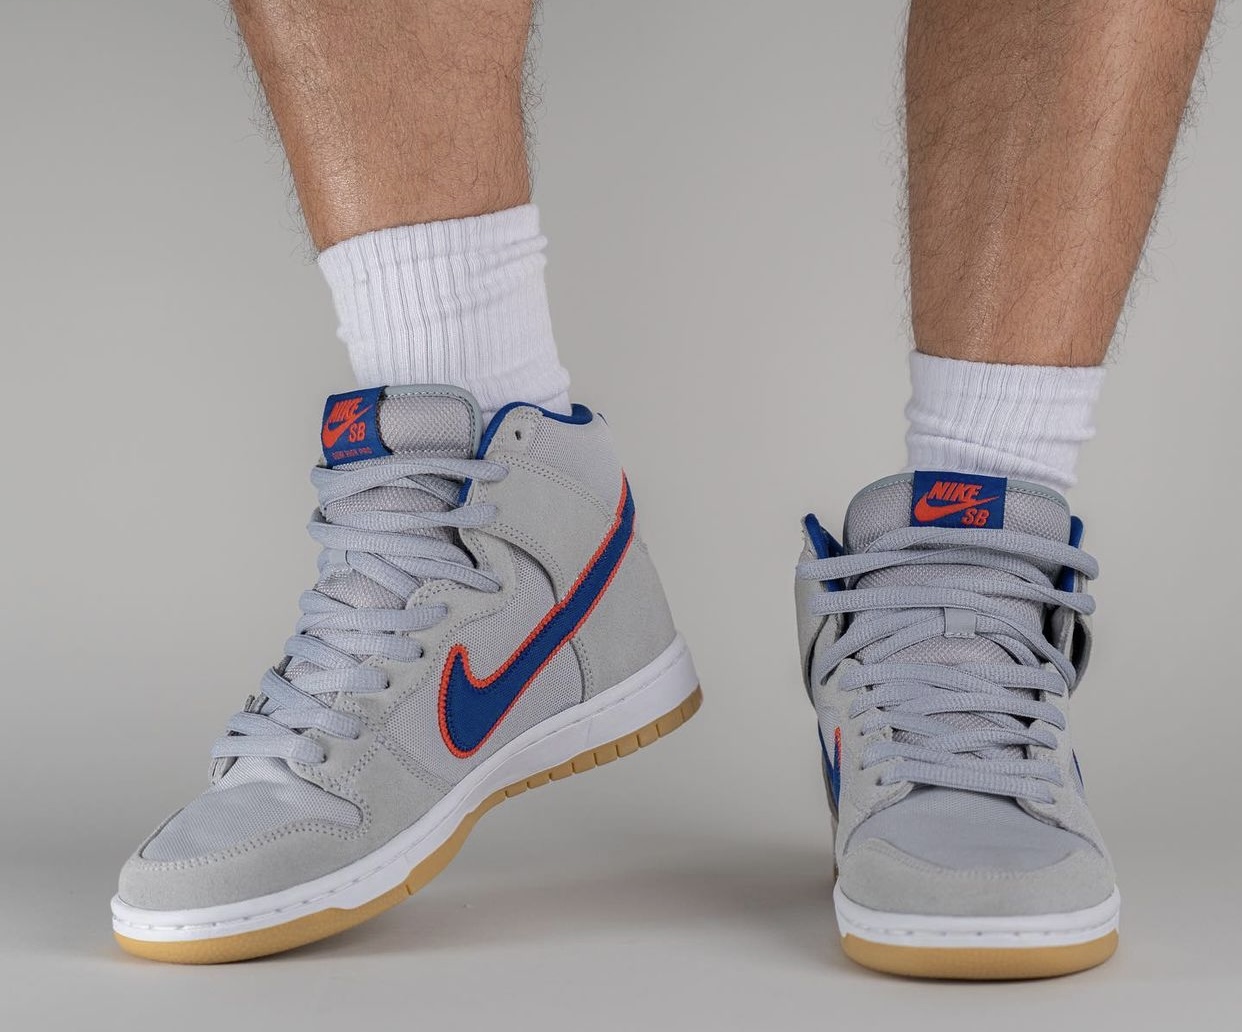 Nike SB Dunk High New York Mets DH7155 001 Release Date On Feet 3